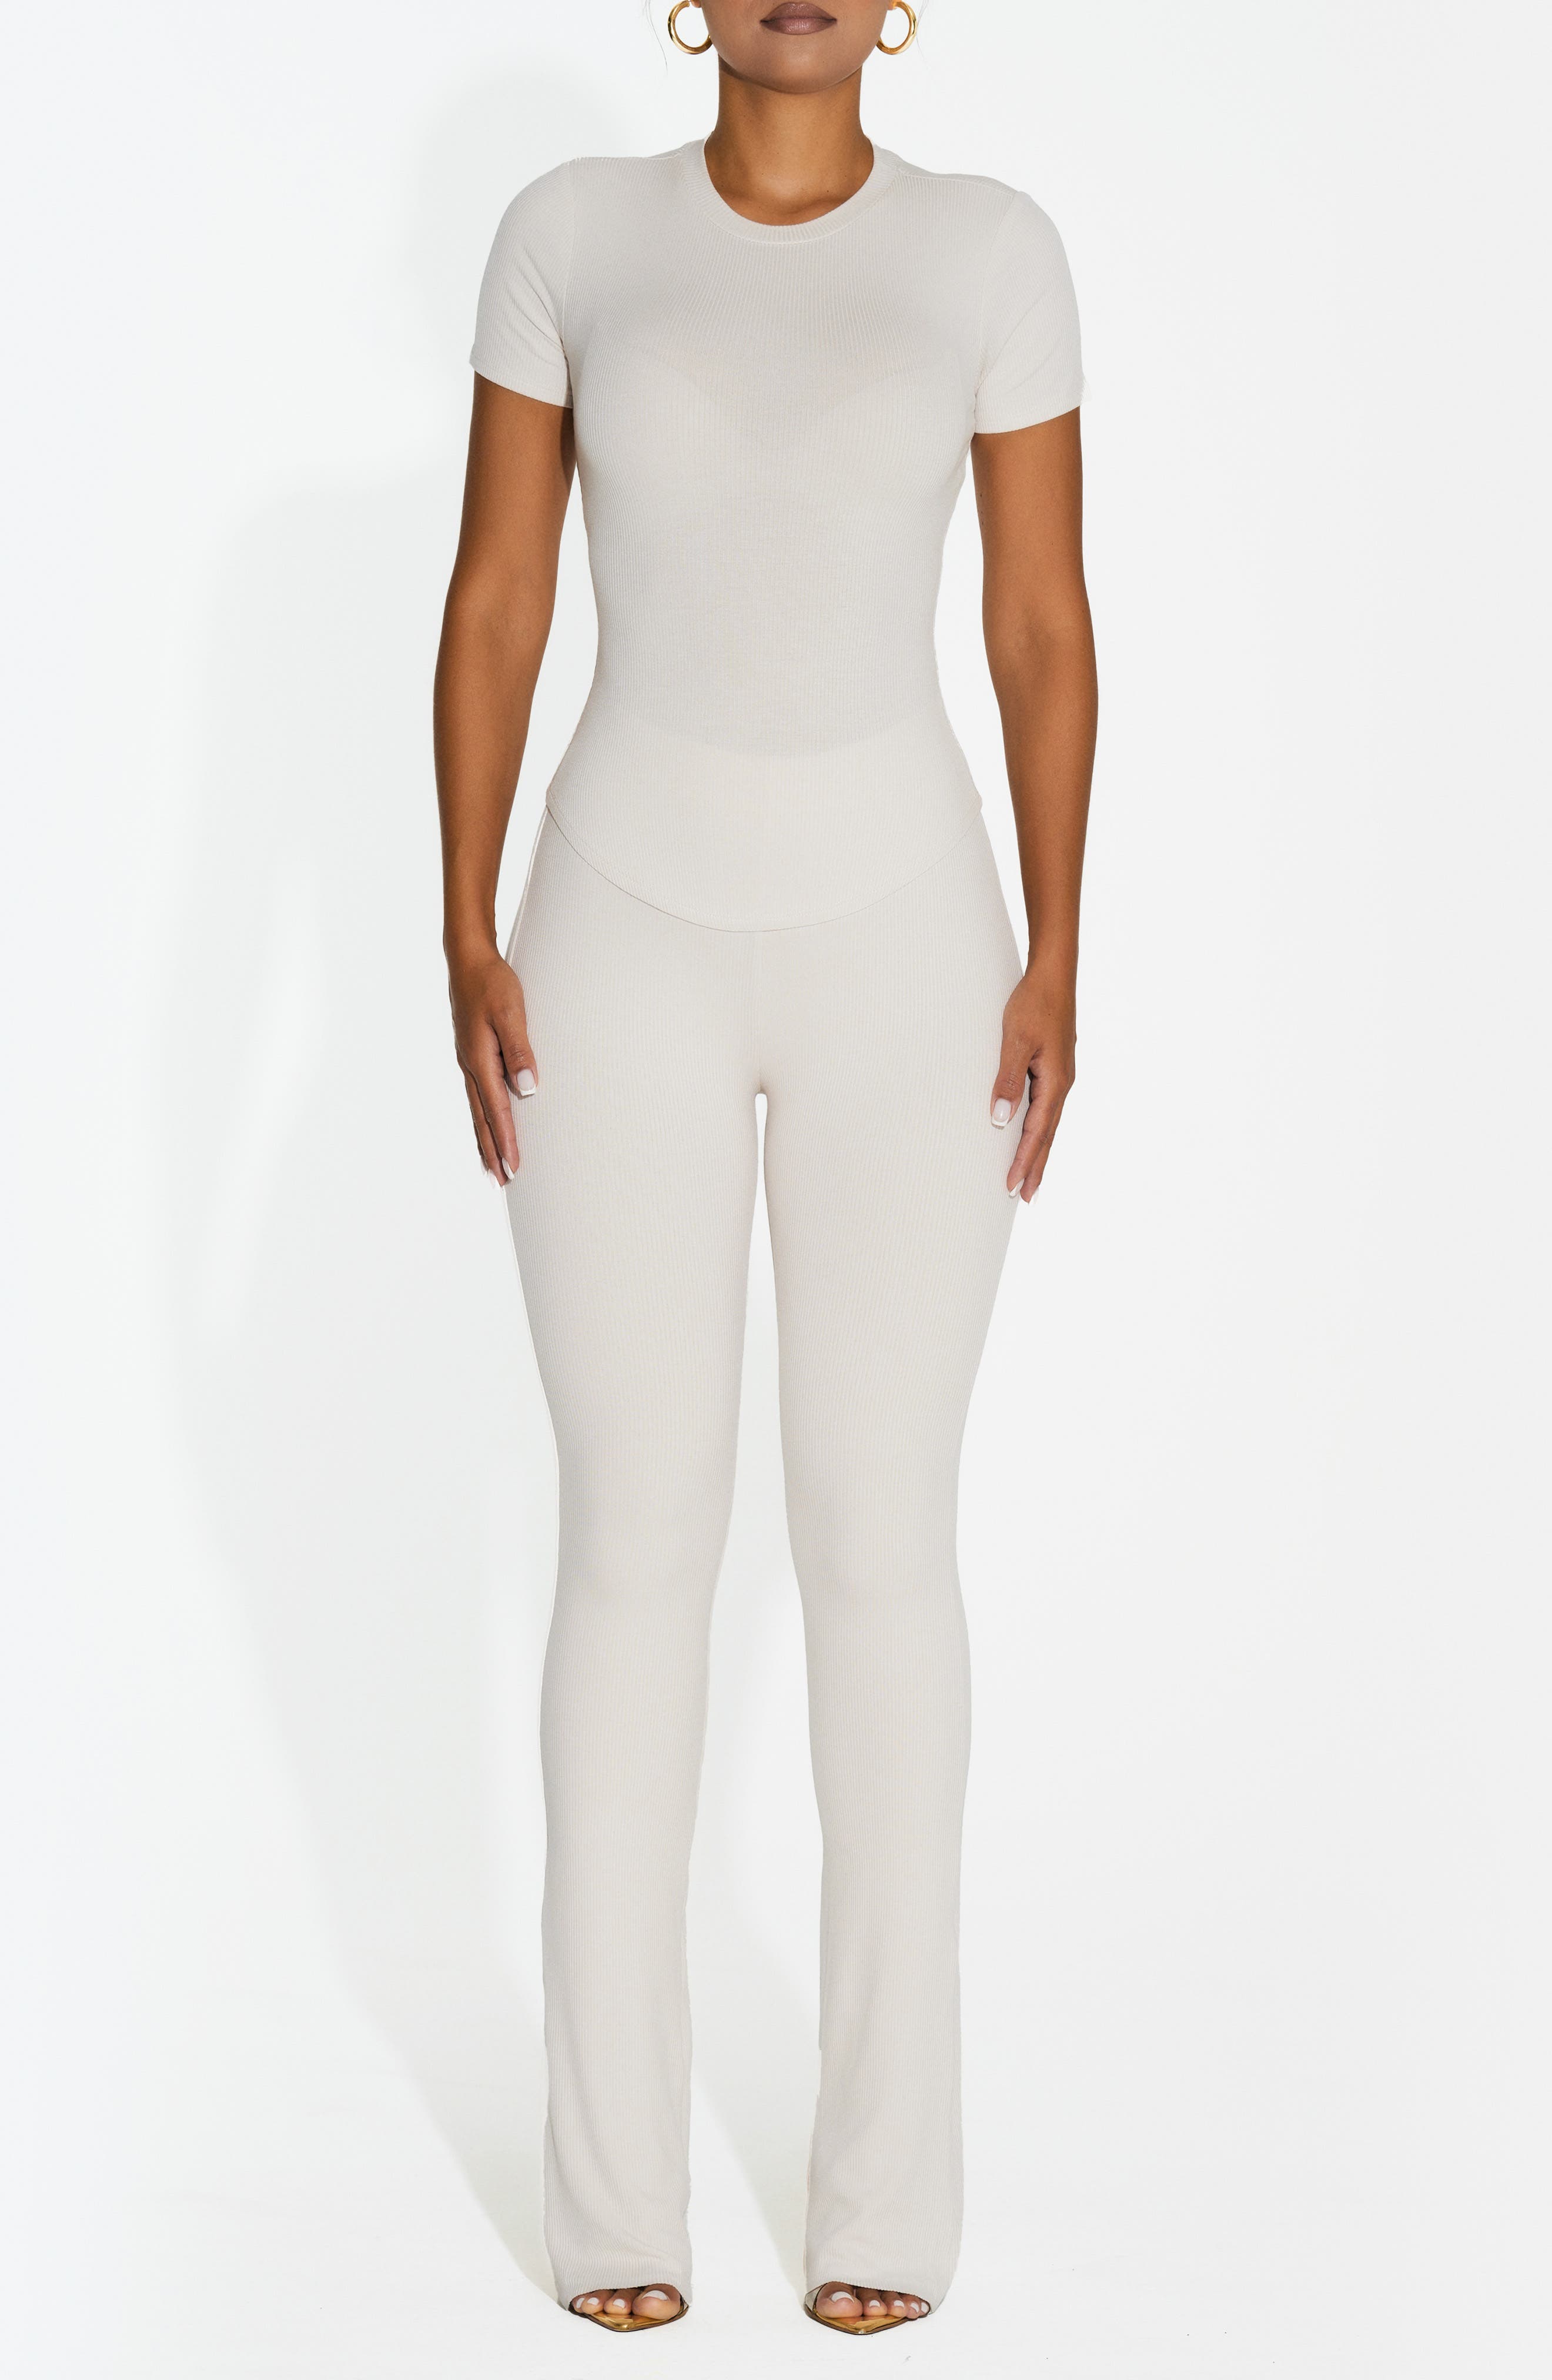 Naked Wardrobe The NW Racerback Jumpsuit - Macy's